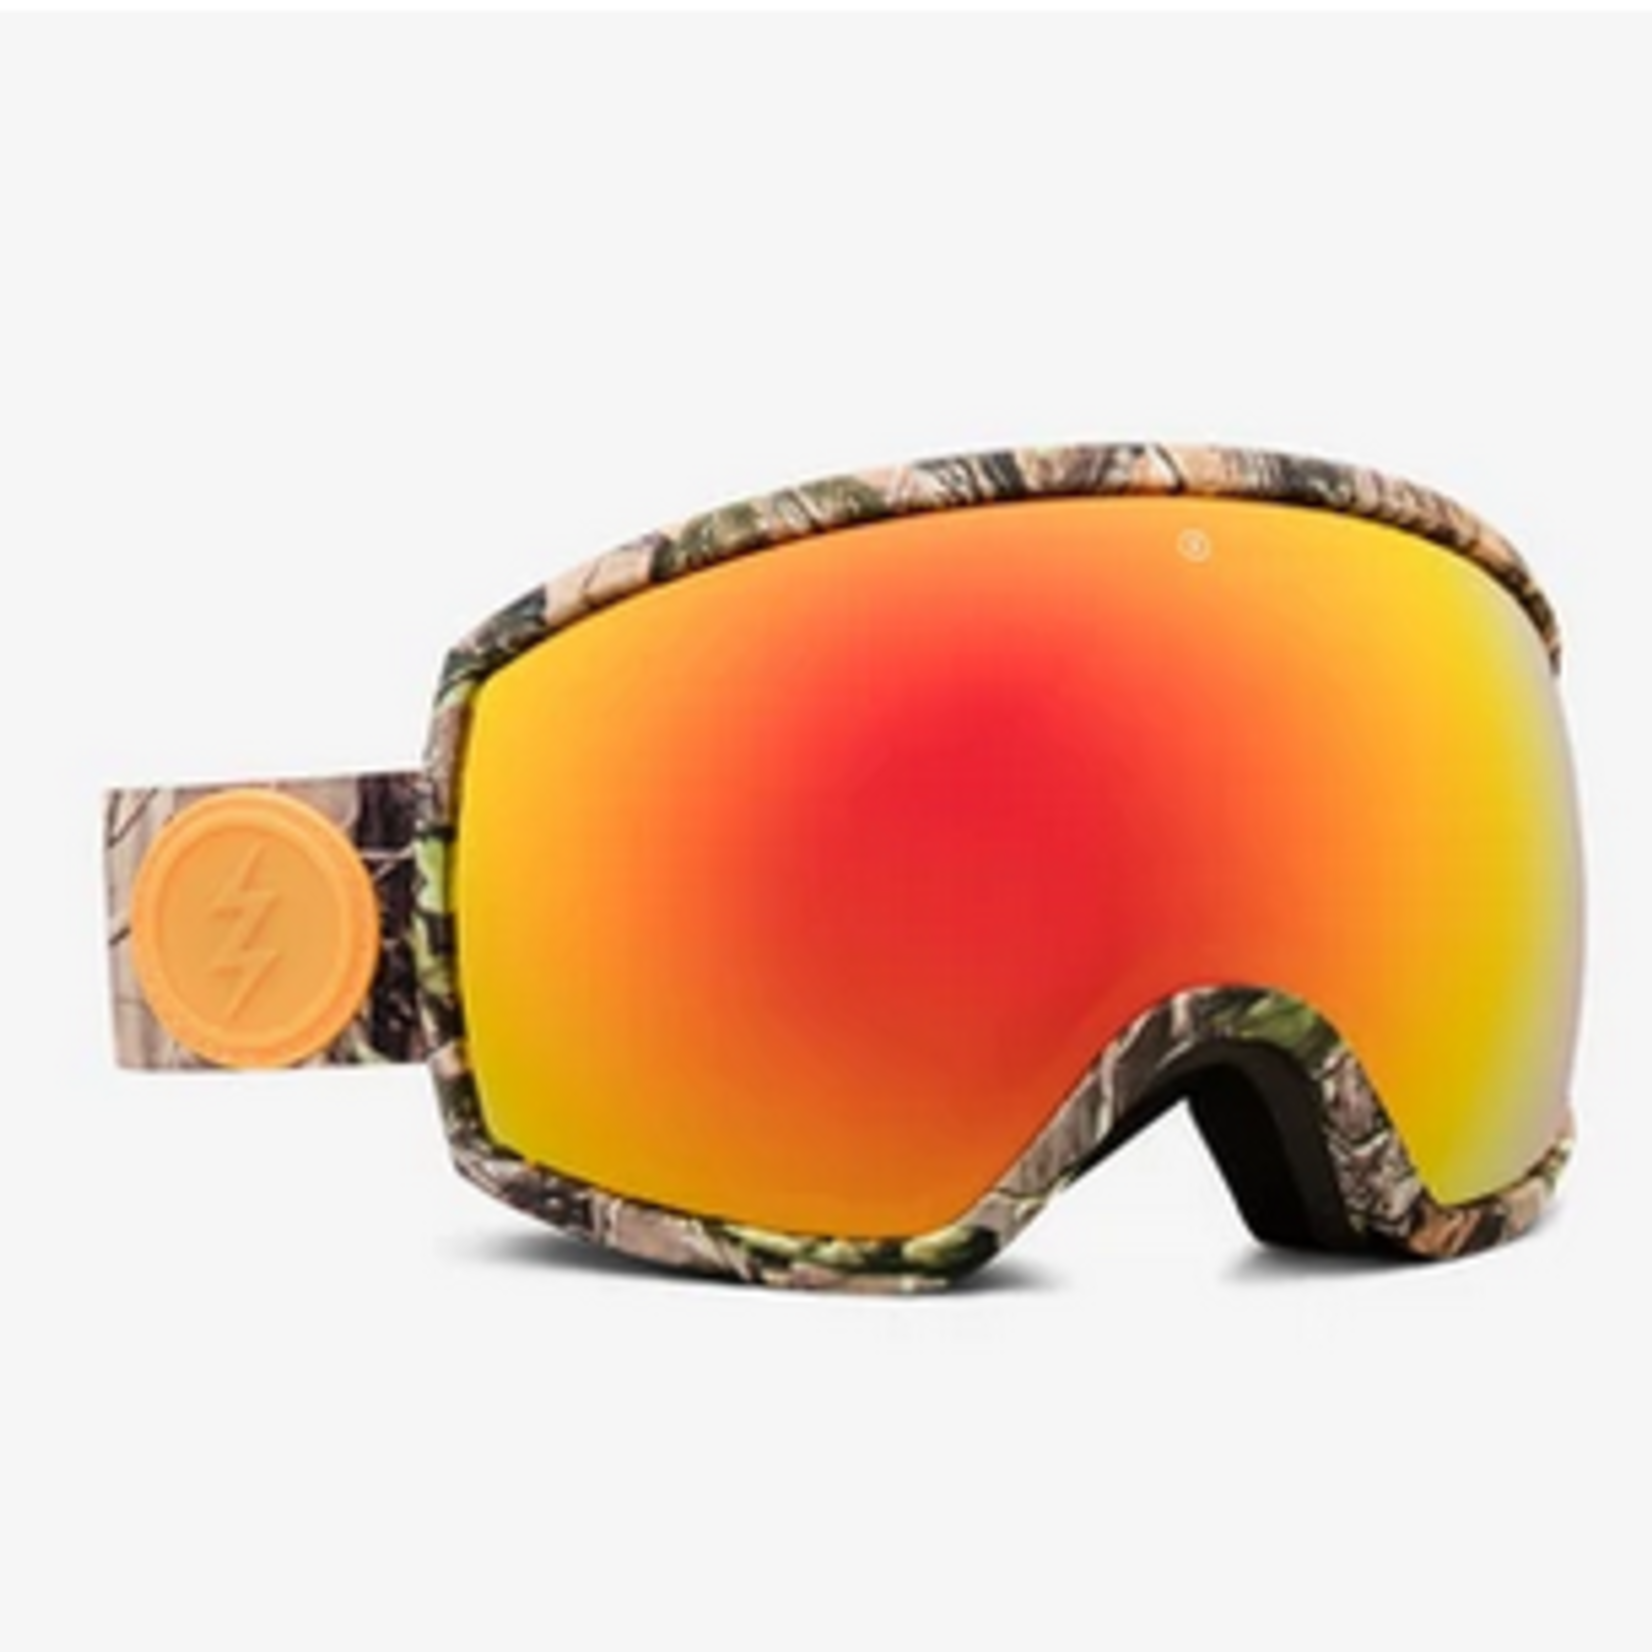 ELECTRIC ELECTRIC EG2-T SNOWBOARD GOGGLES